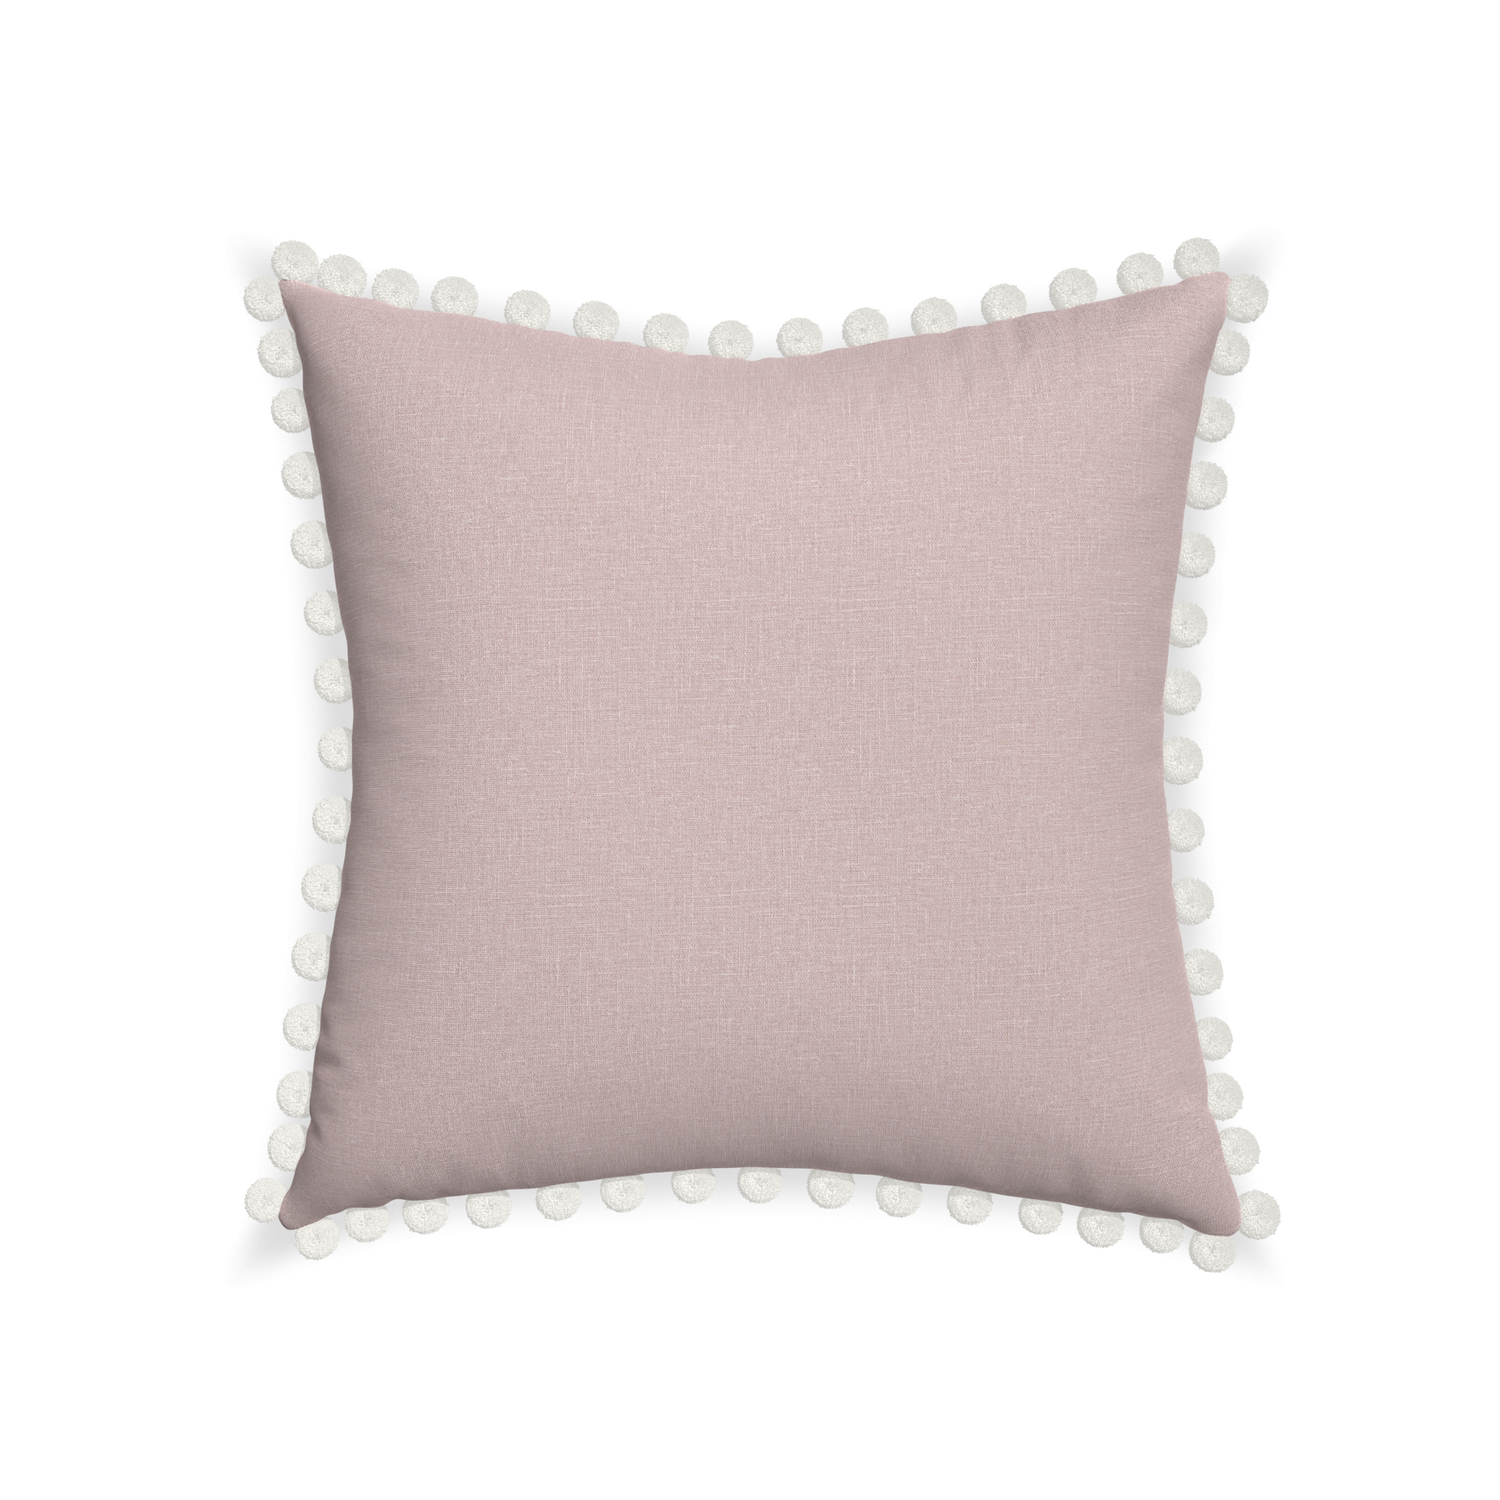 22-square orchid custom mauve pinkpillow with snow pom pom on white background